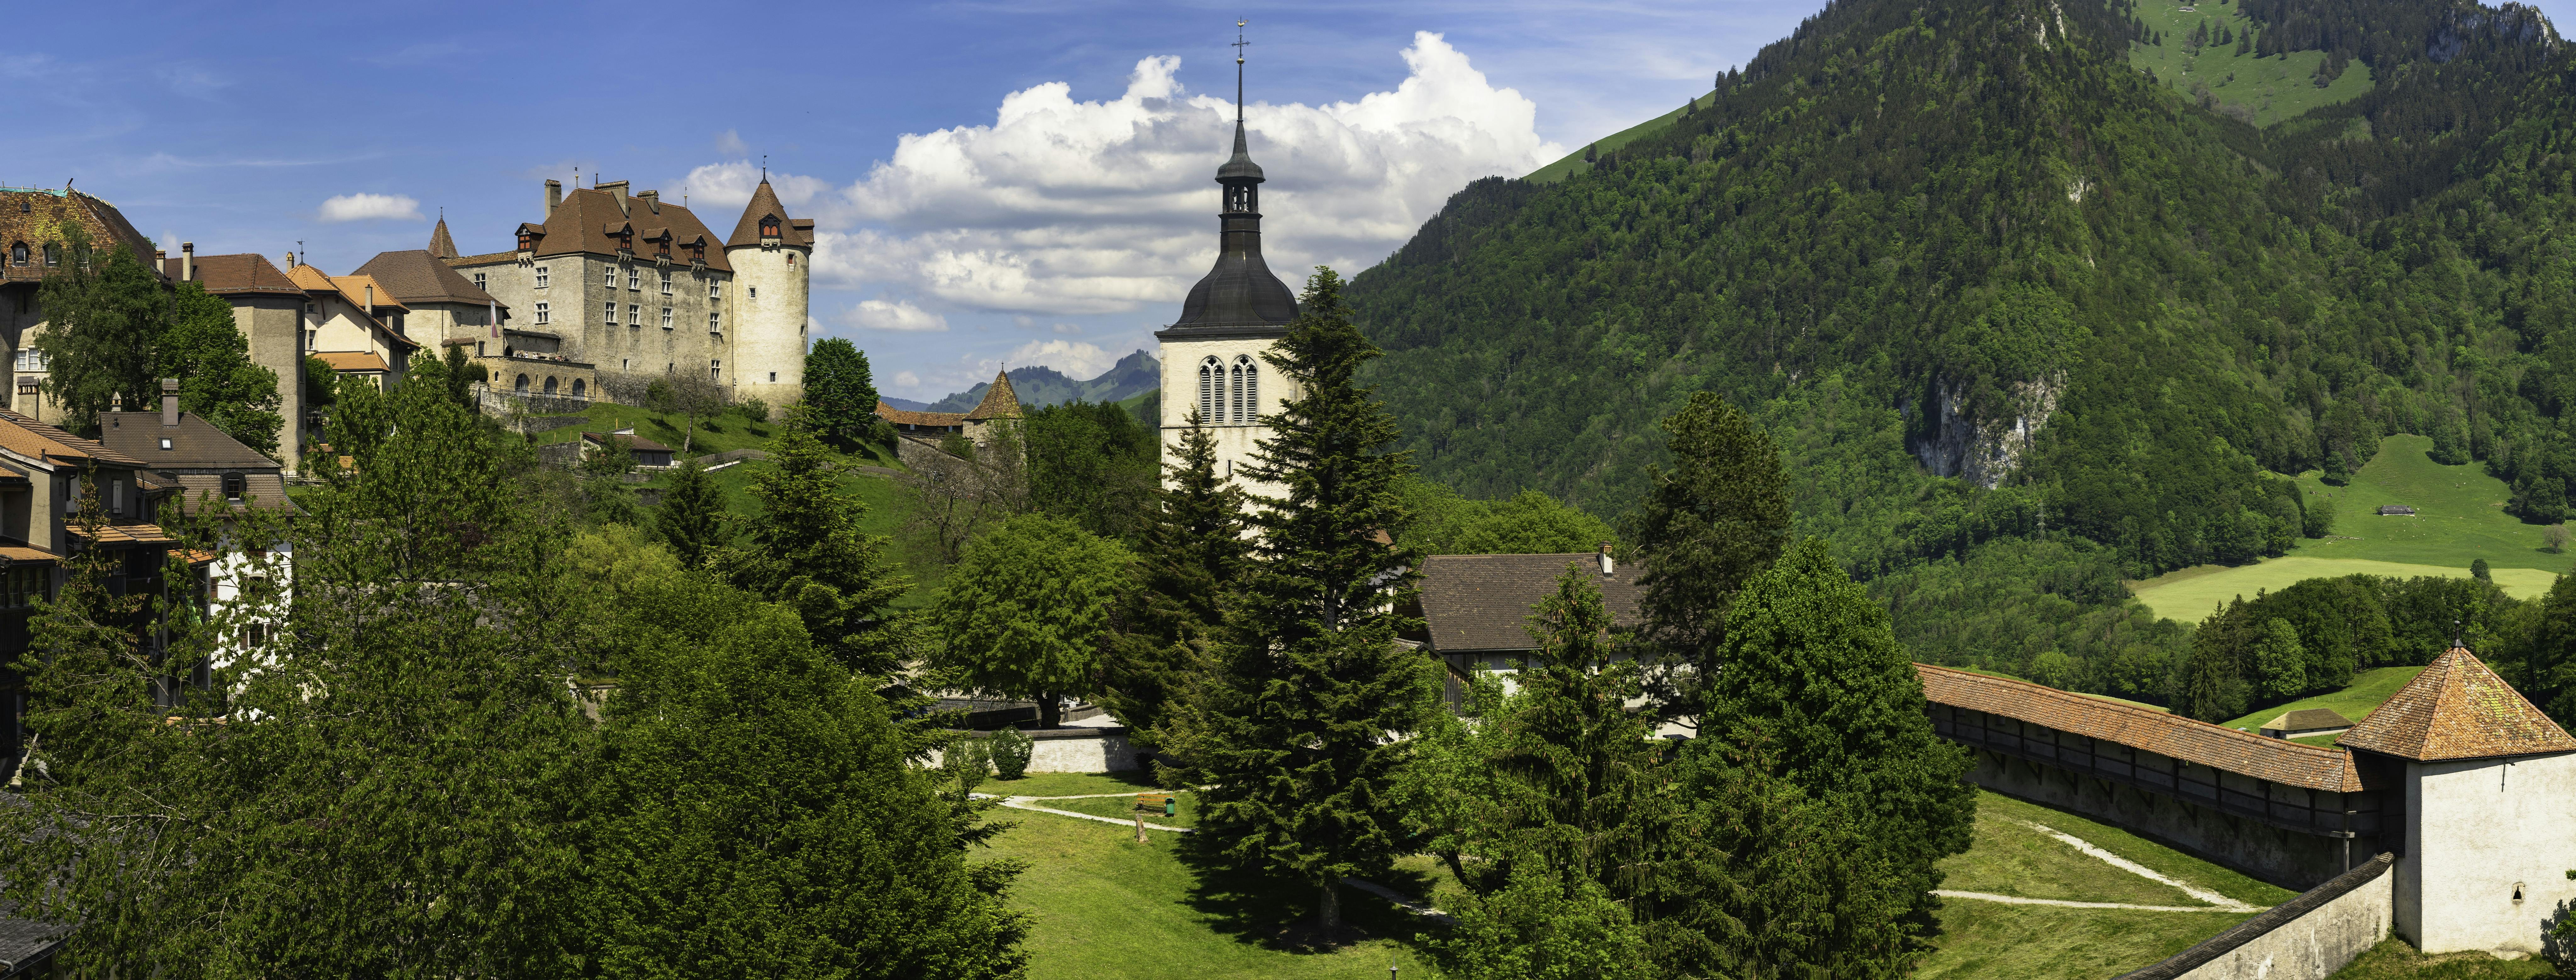 Gruyères chocolate and cheese tour from Lausanne with Golden Pass train ride